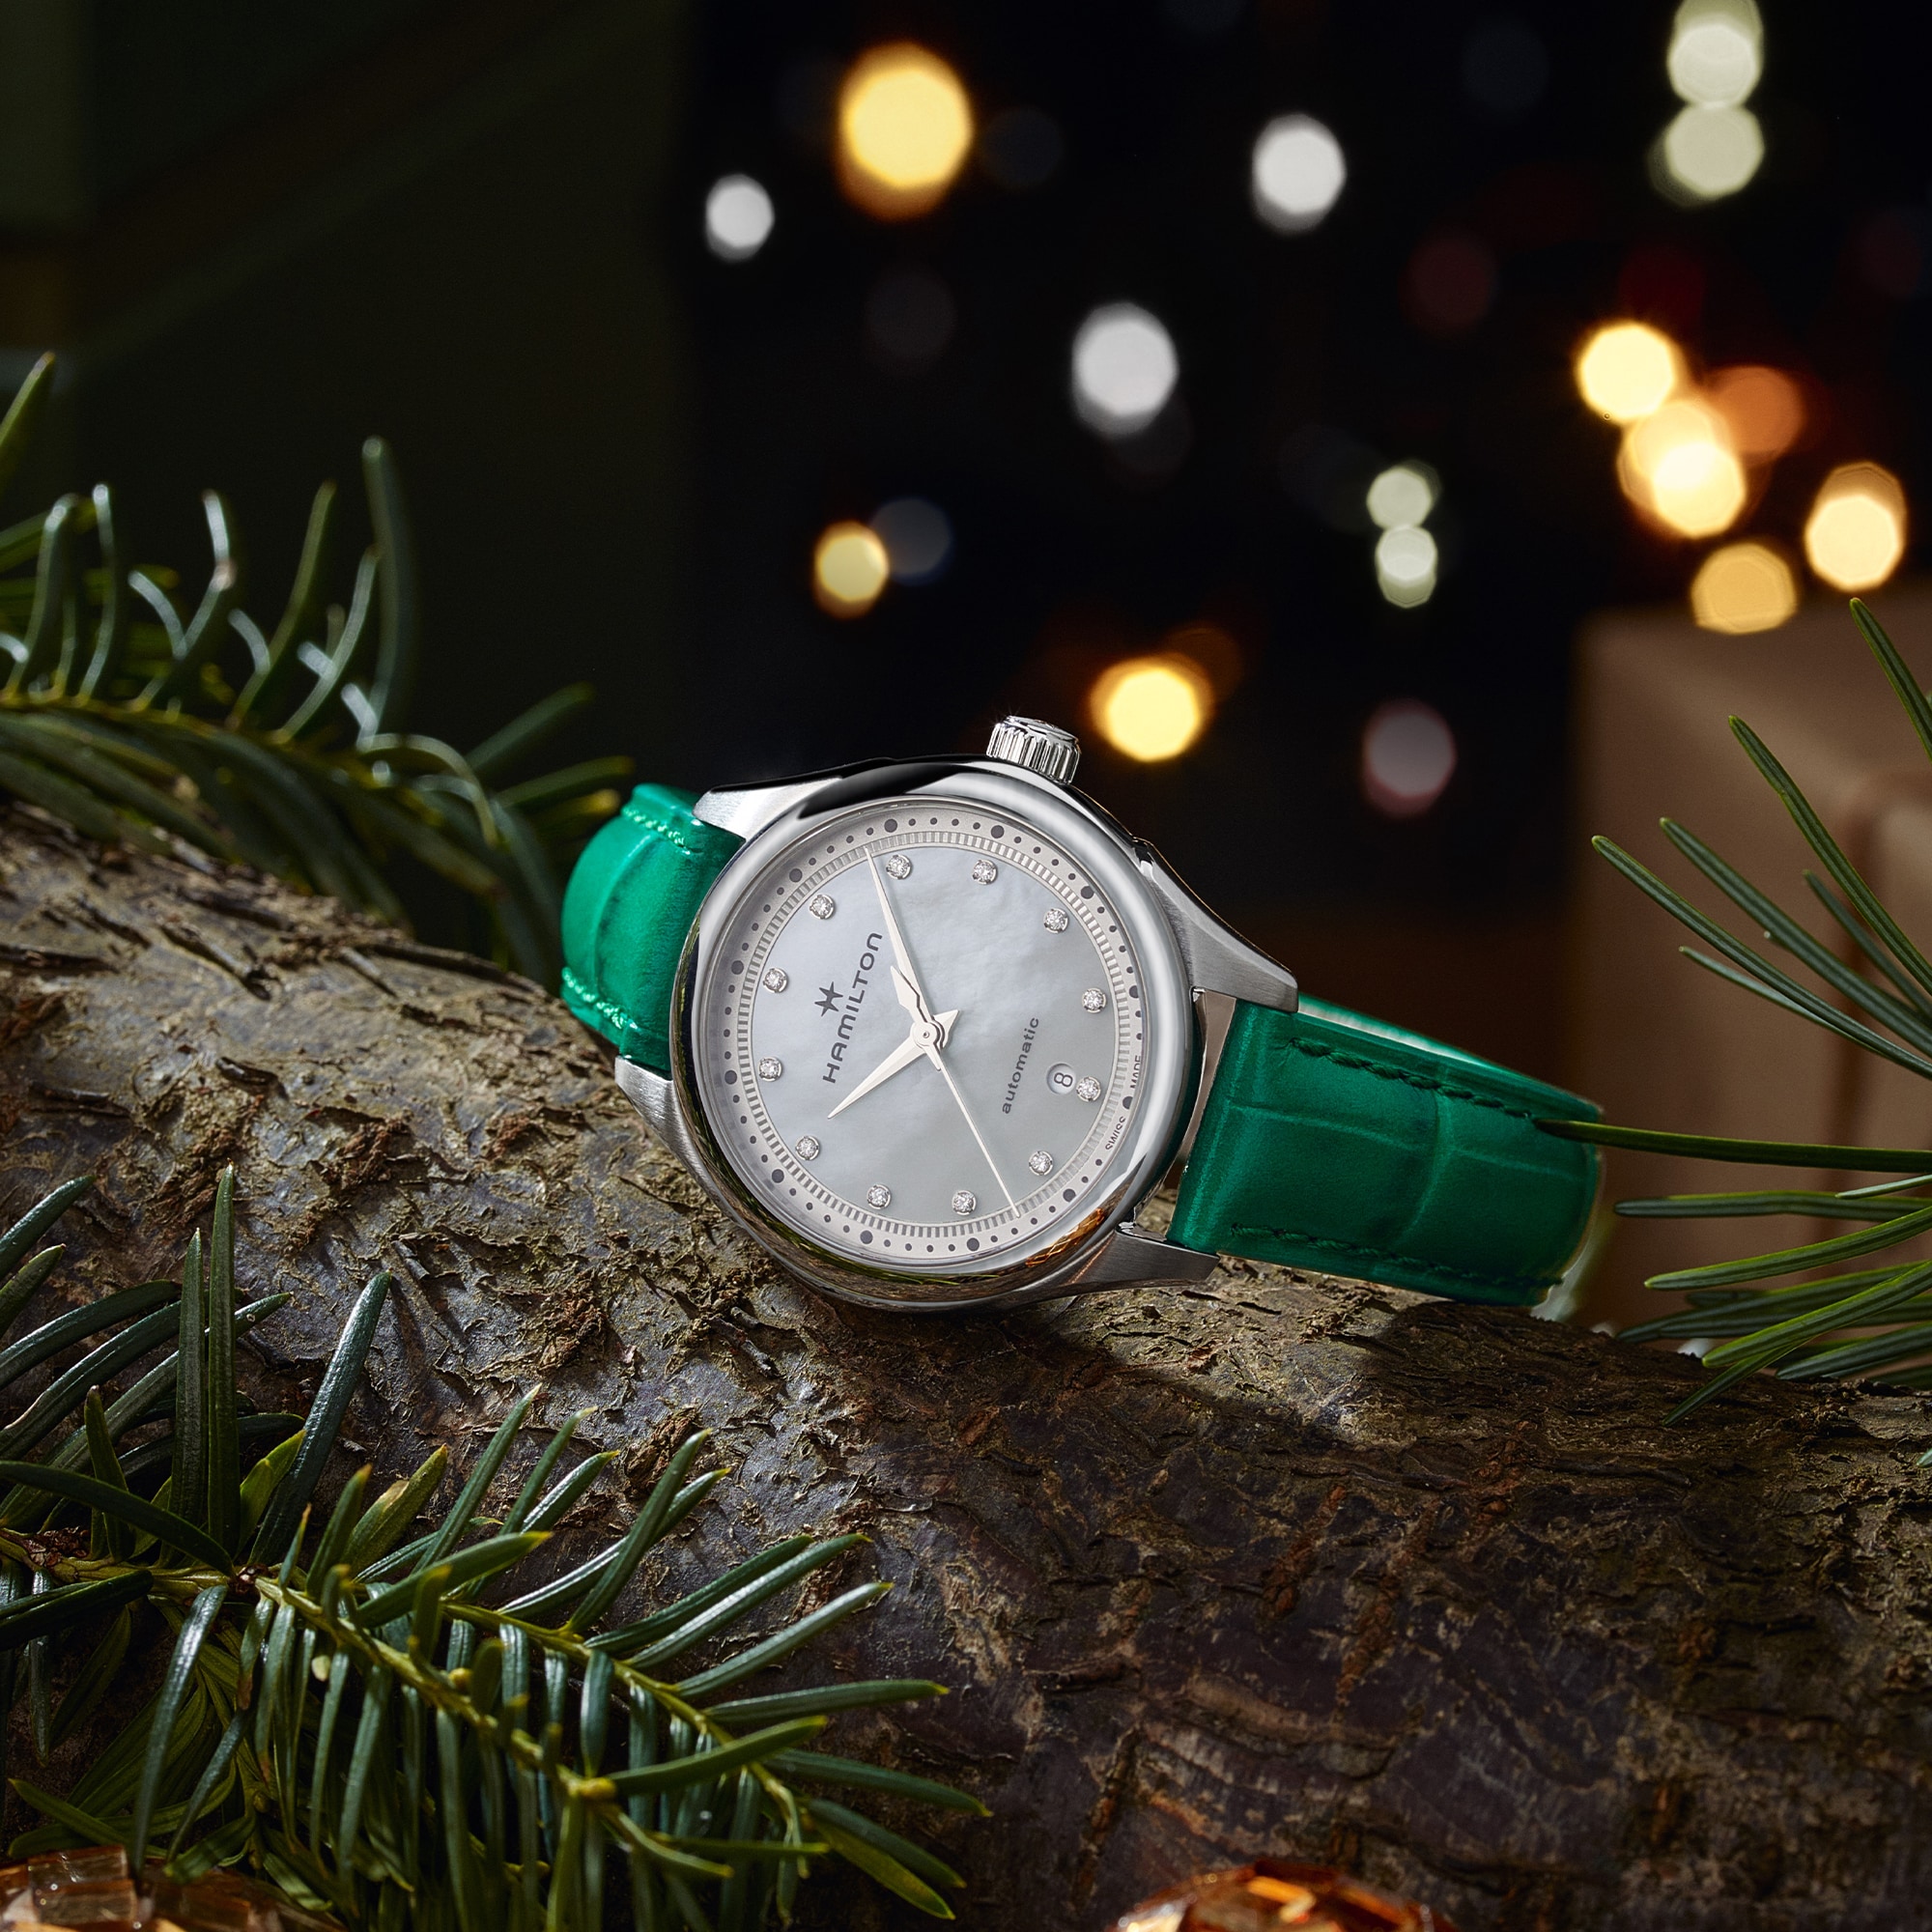 Celebrate the most festive time of the year with a Hamilton timepiece